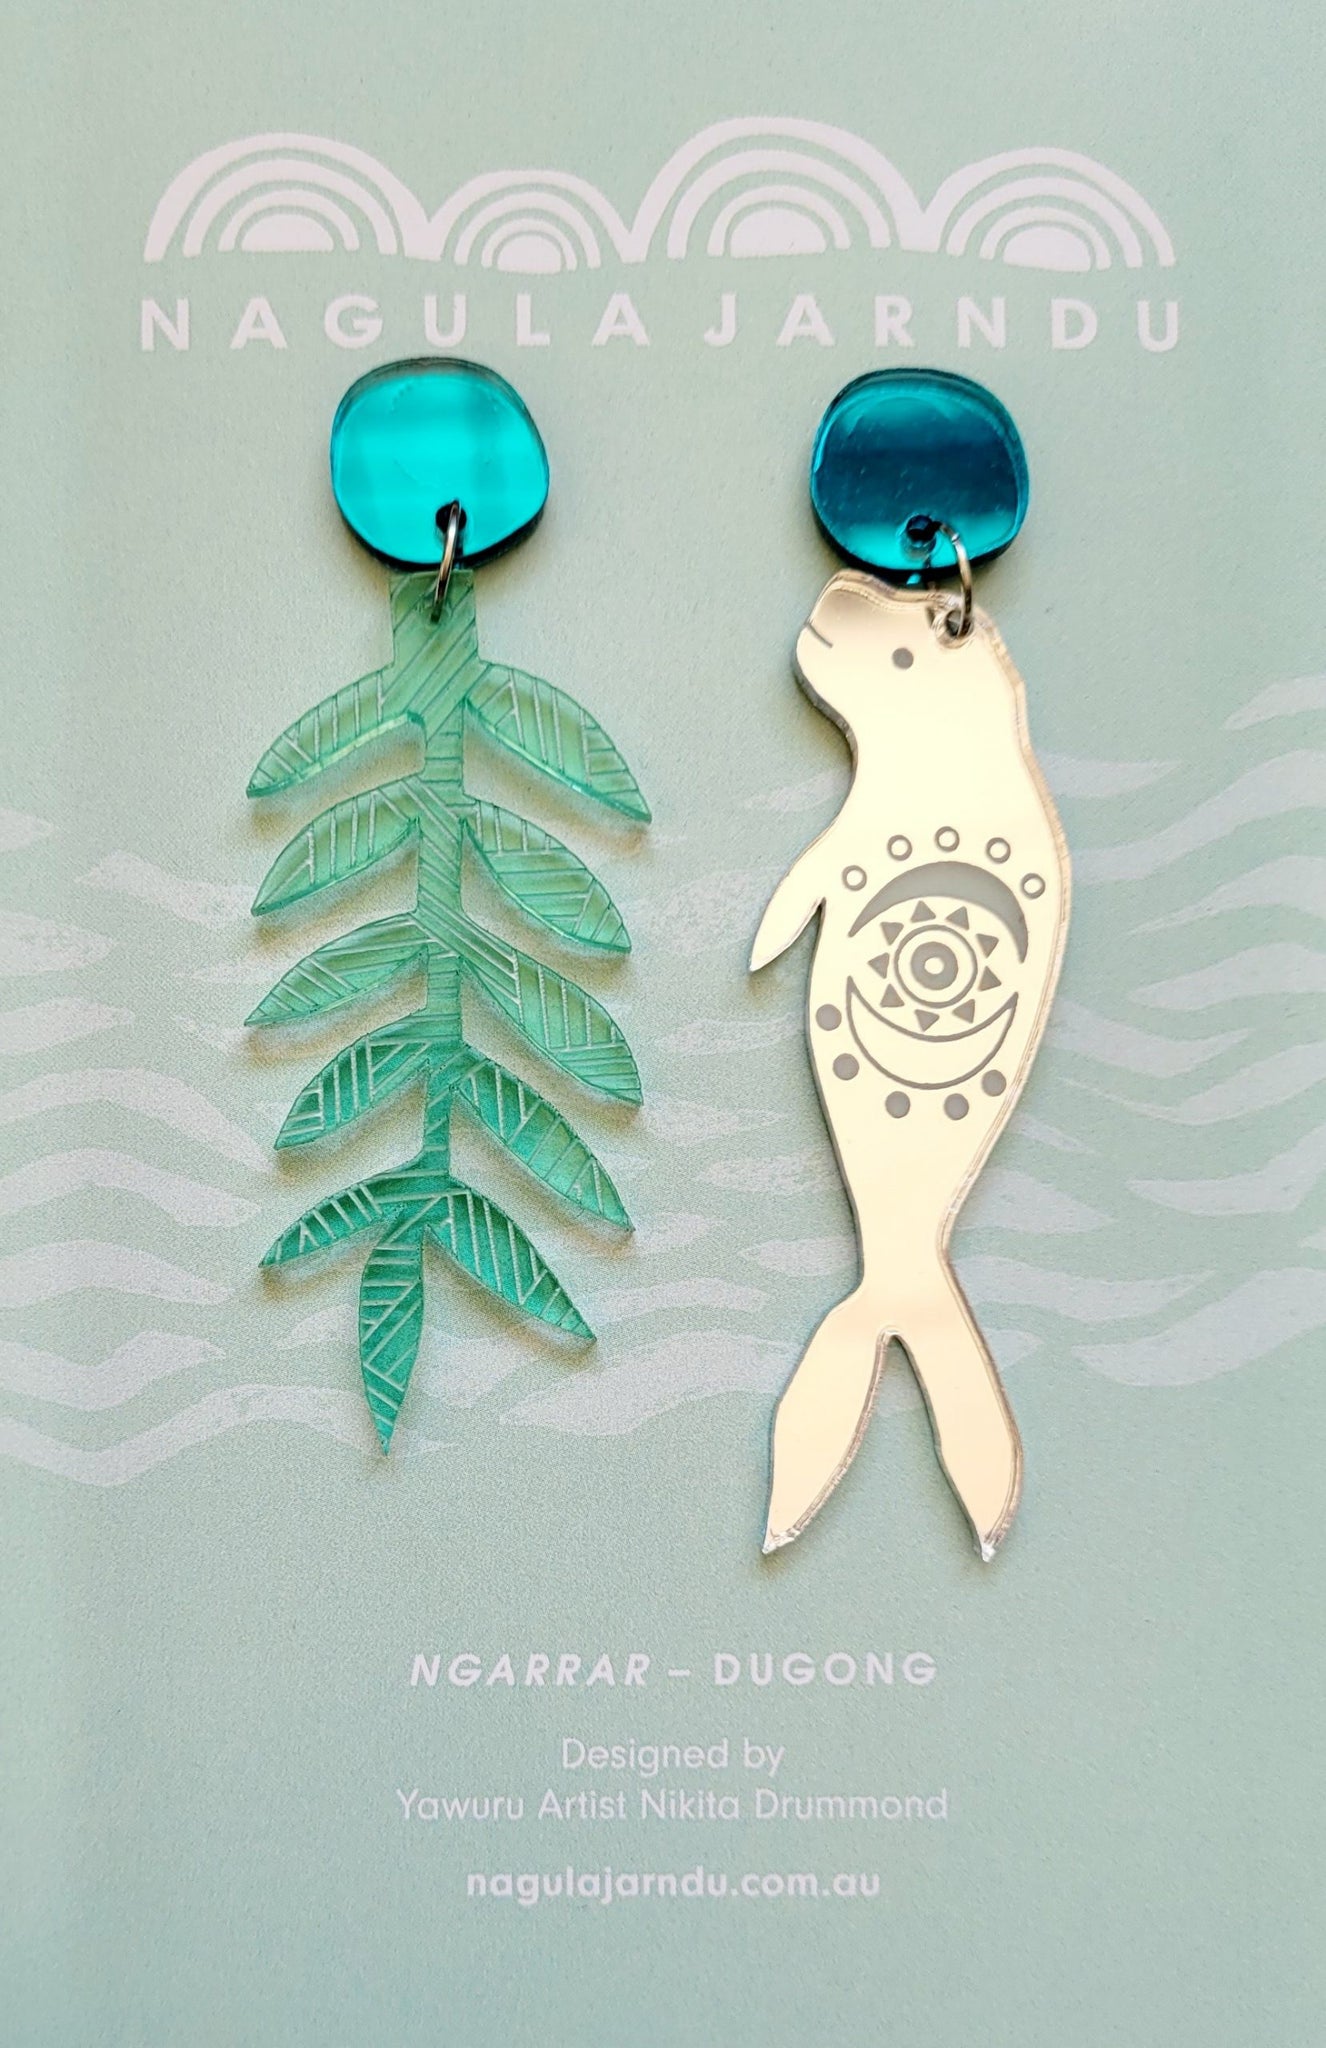 Dugong "Nganarr" and Seagrass Mismatched Earrings